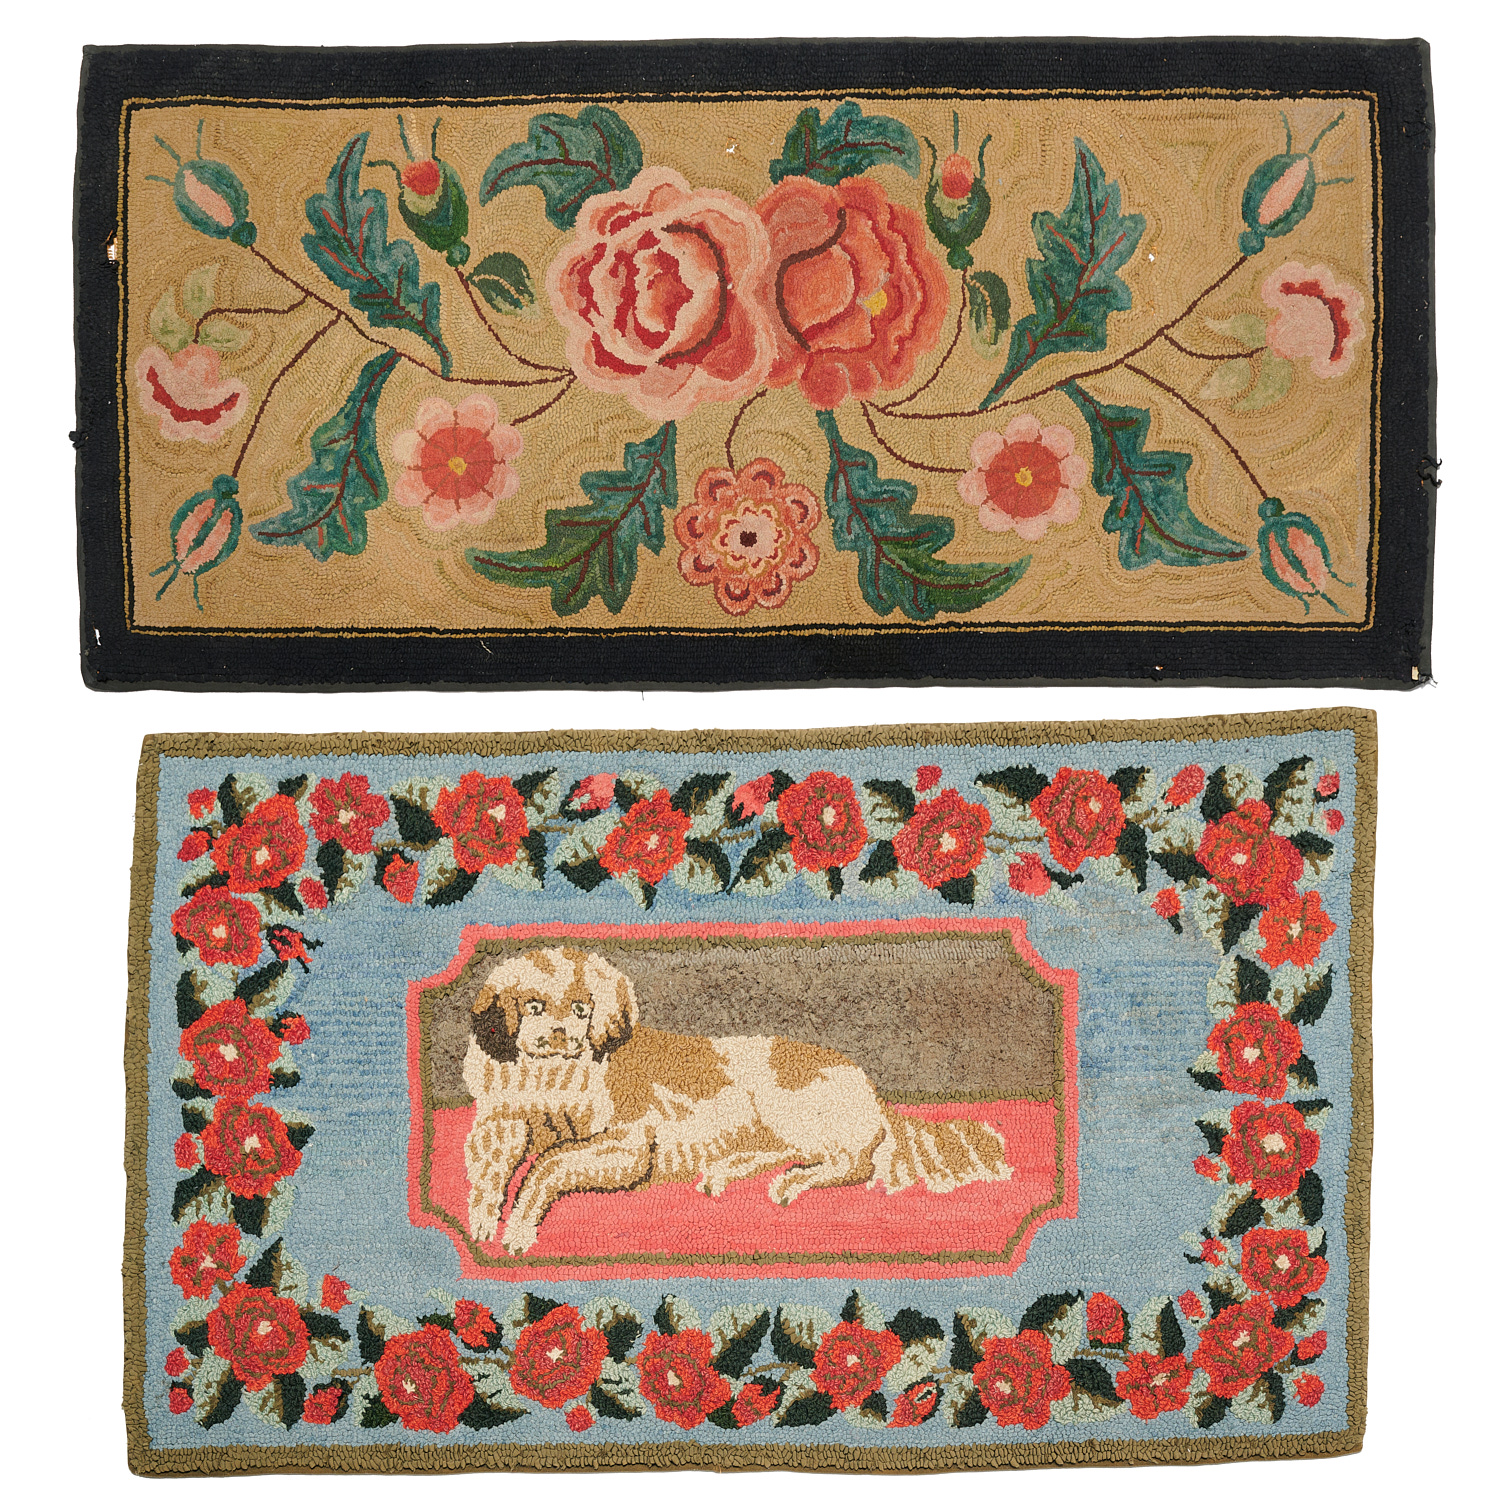 (2) AMERICAN HOOKED RUGS 19th c.,